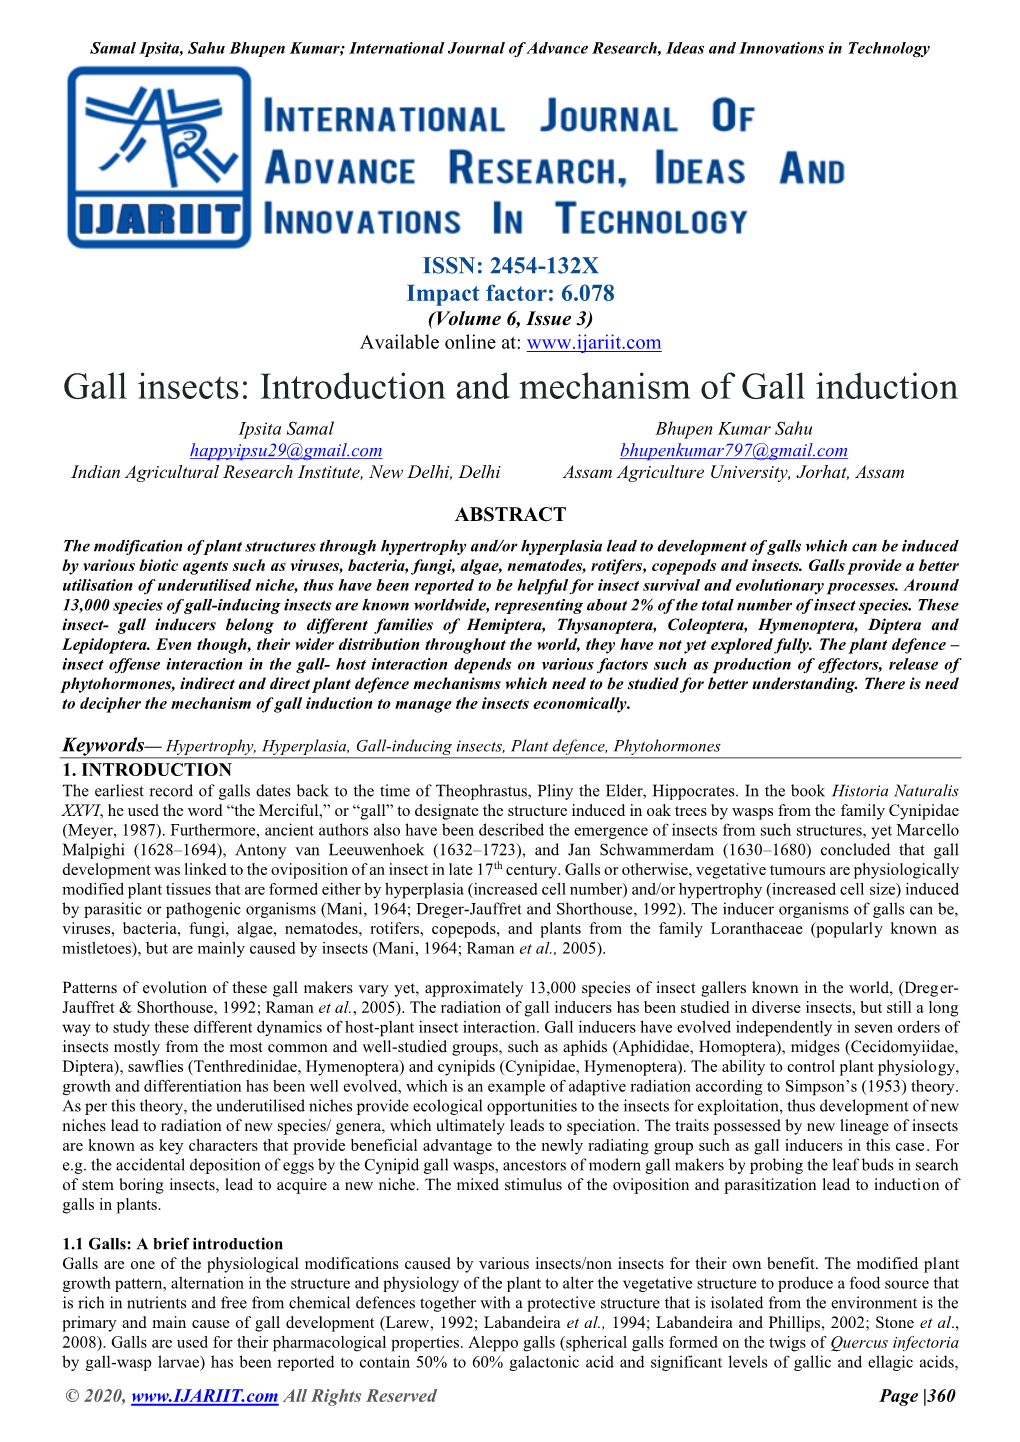 Gall Insects: Introduction and Mechanism of Gall Induction